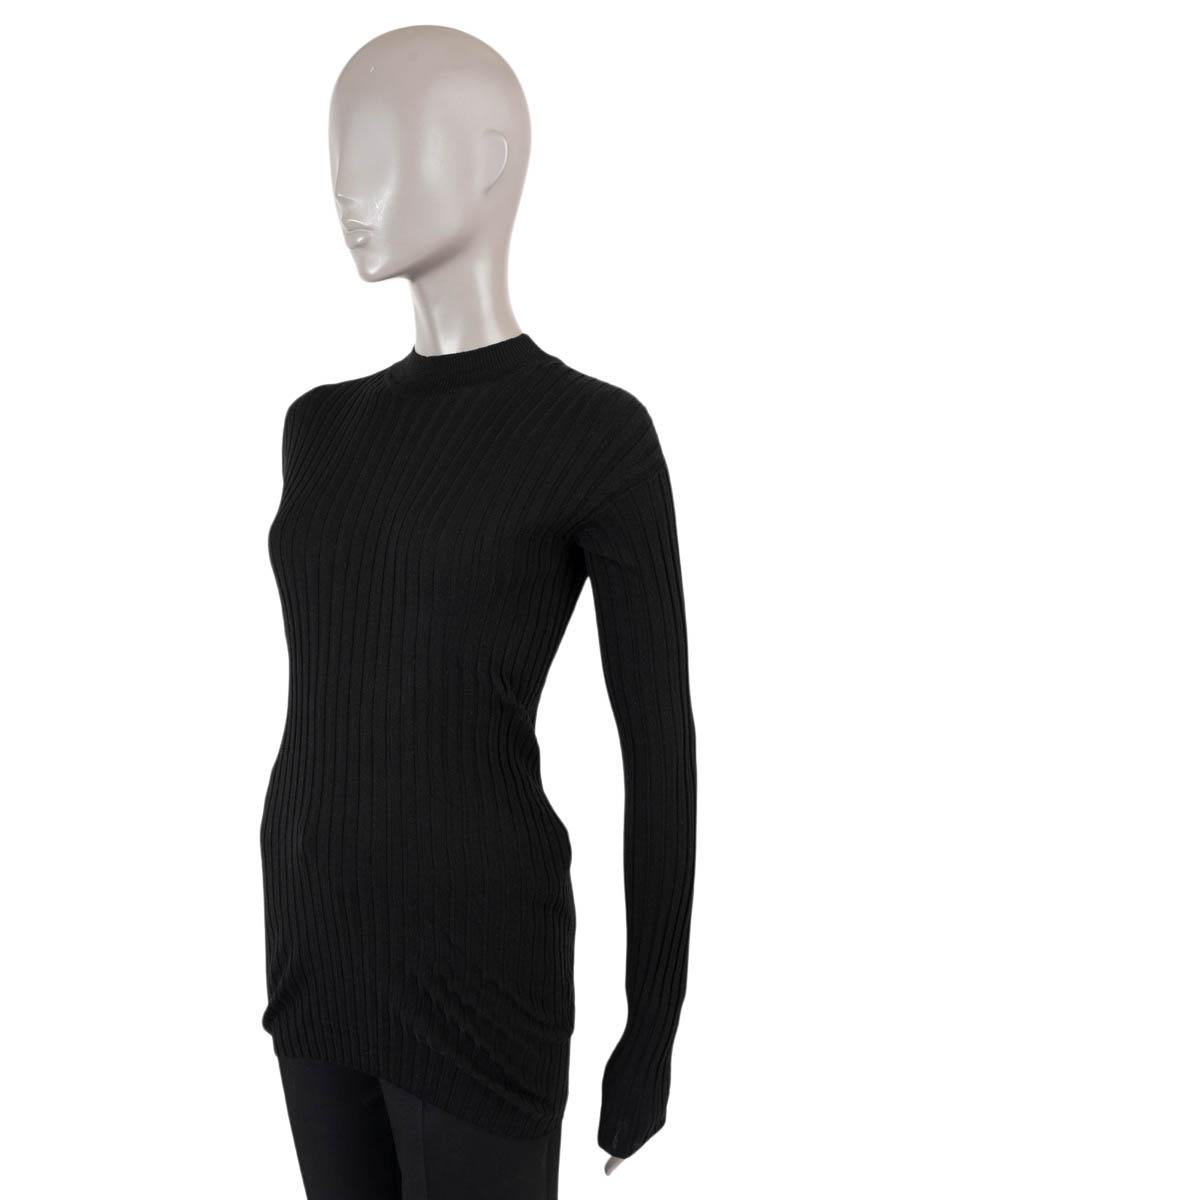 100% authentic Bottega Veneta seamless sweater in black rib-knit wool (100%). Features a crewneck and extra long sleeves. Has been worn and is in excellent condition.

2020 Pre-Fall

Measurements
Model	631391 VKWG0 EPBV-20-301
Tag